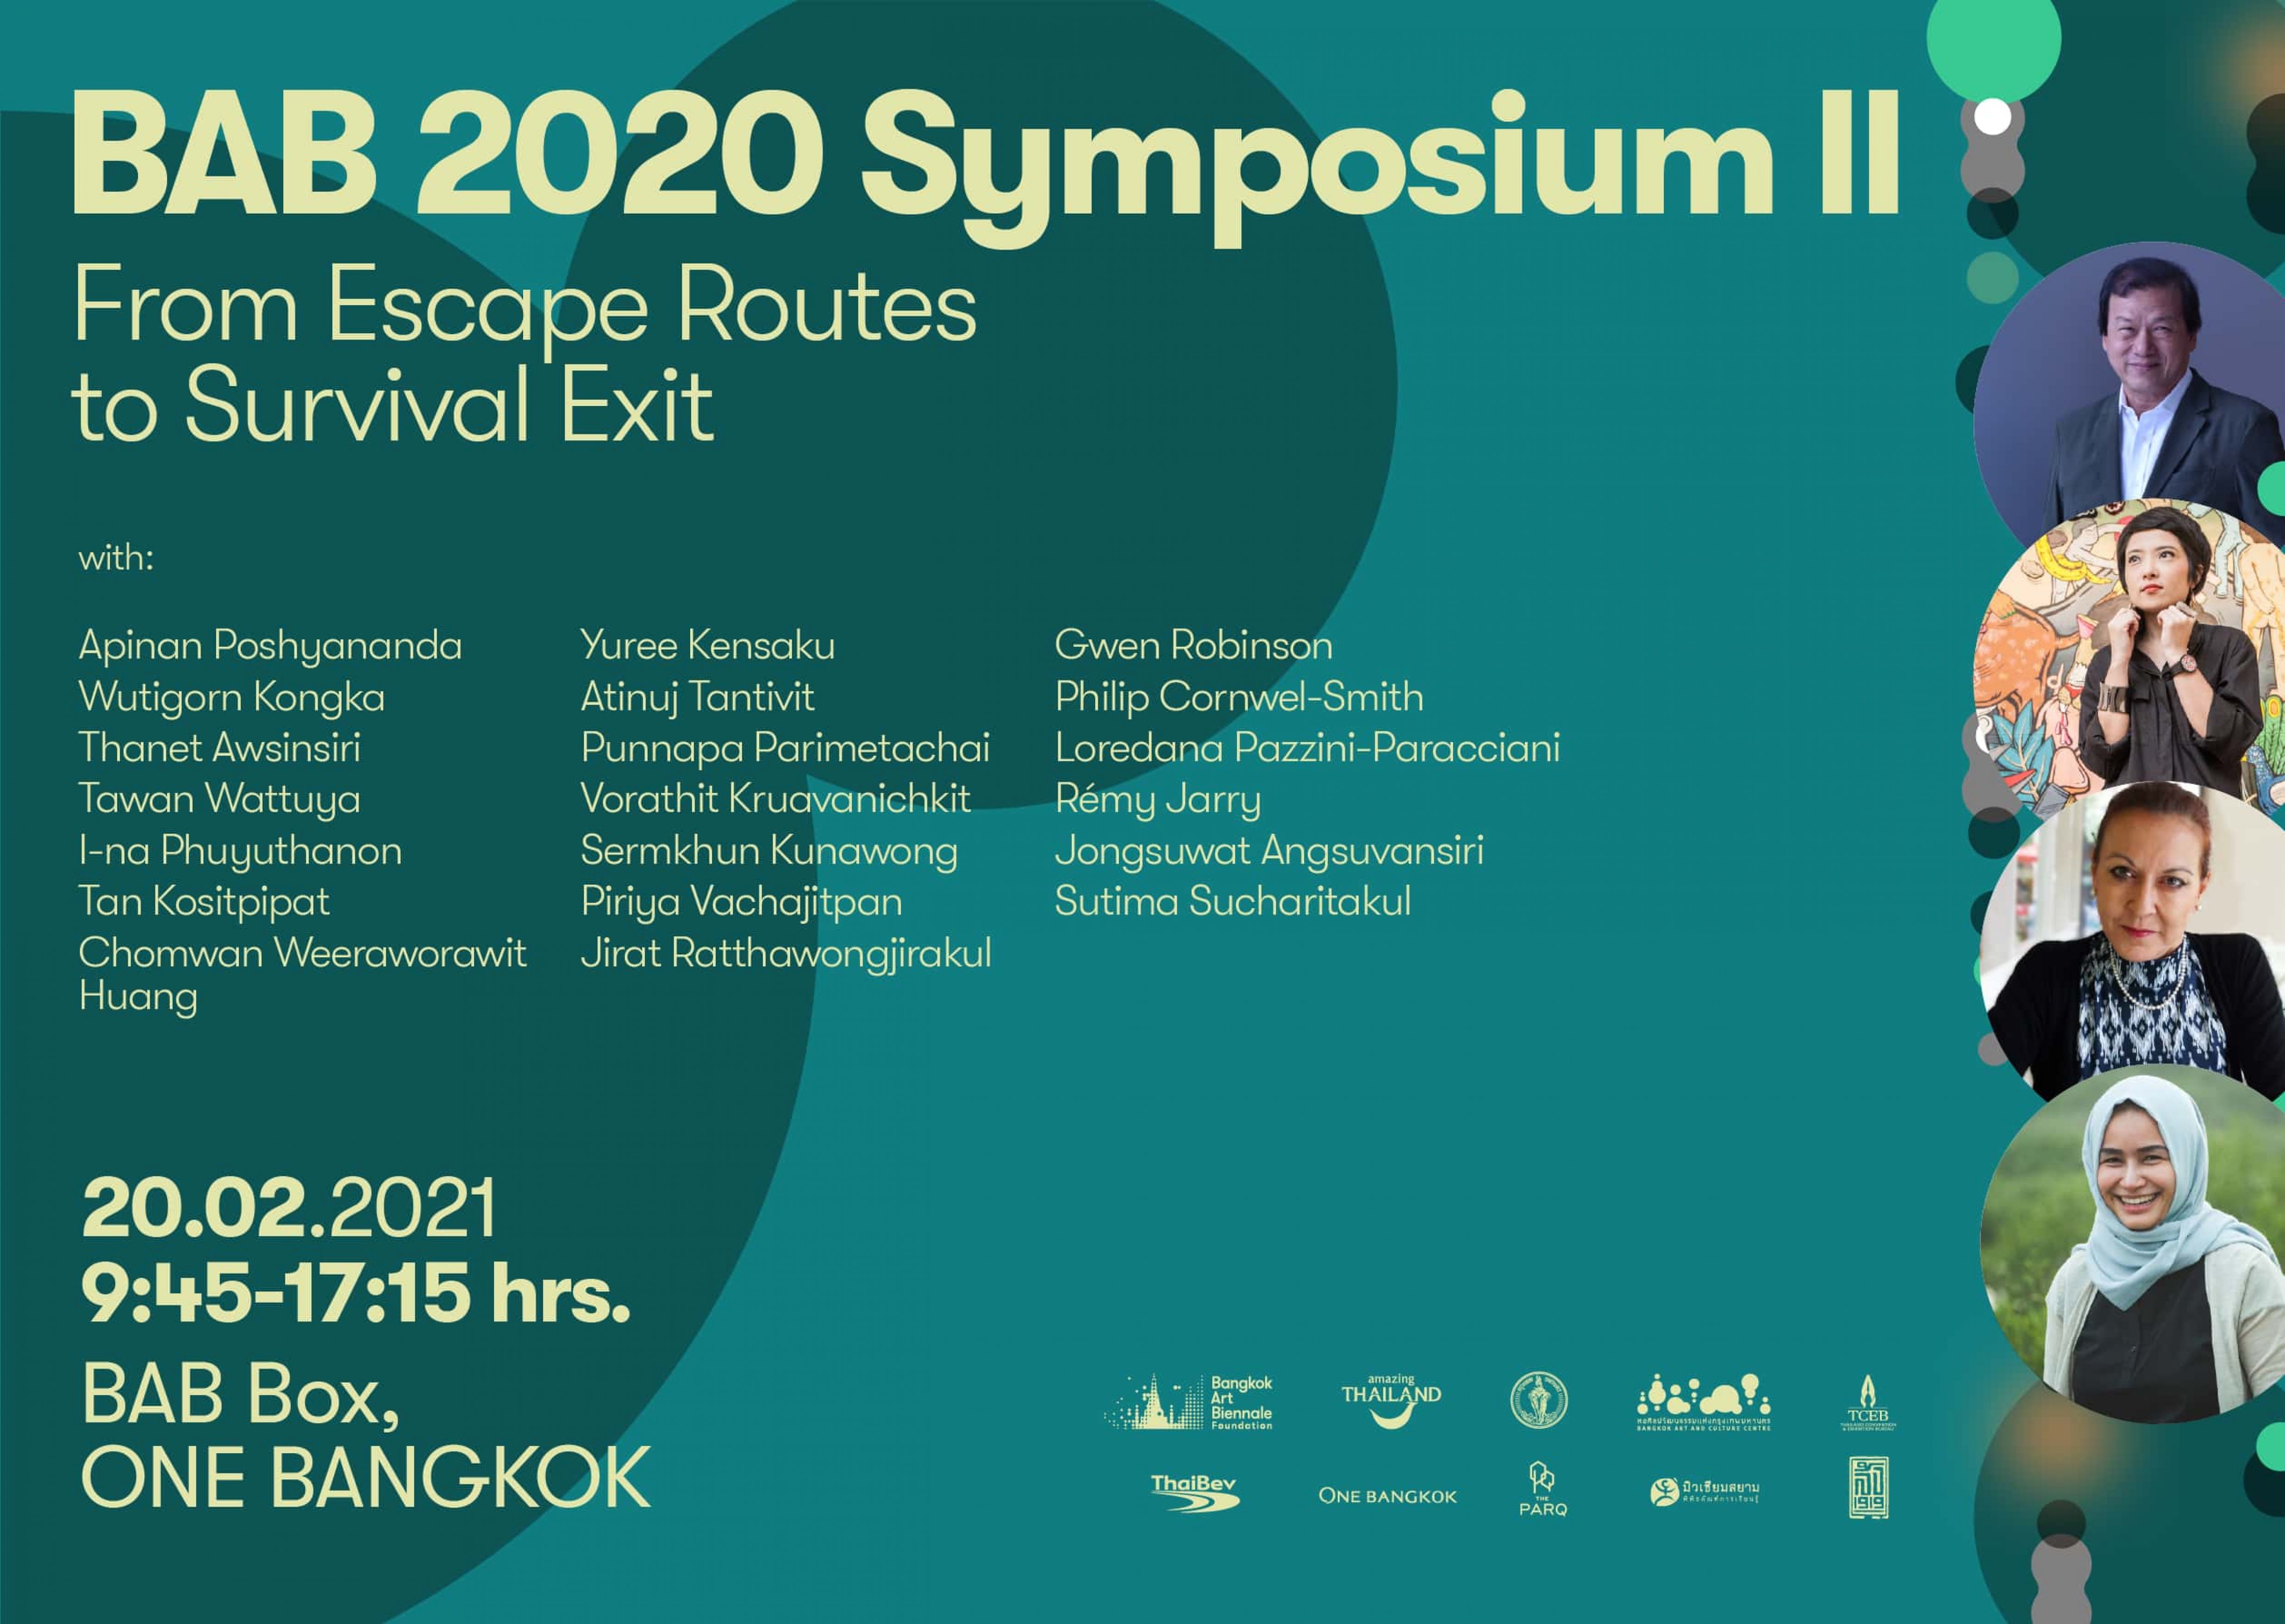 BAB 2020 Symposium II: From Escape Routes to Survival Exit